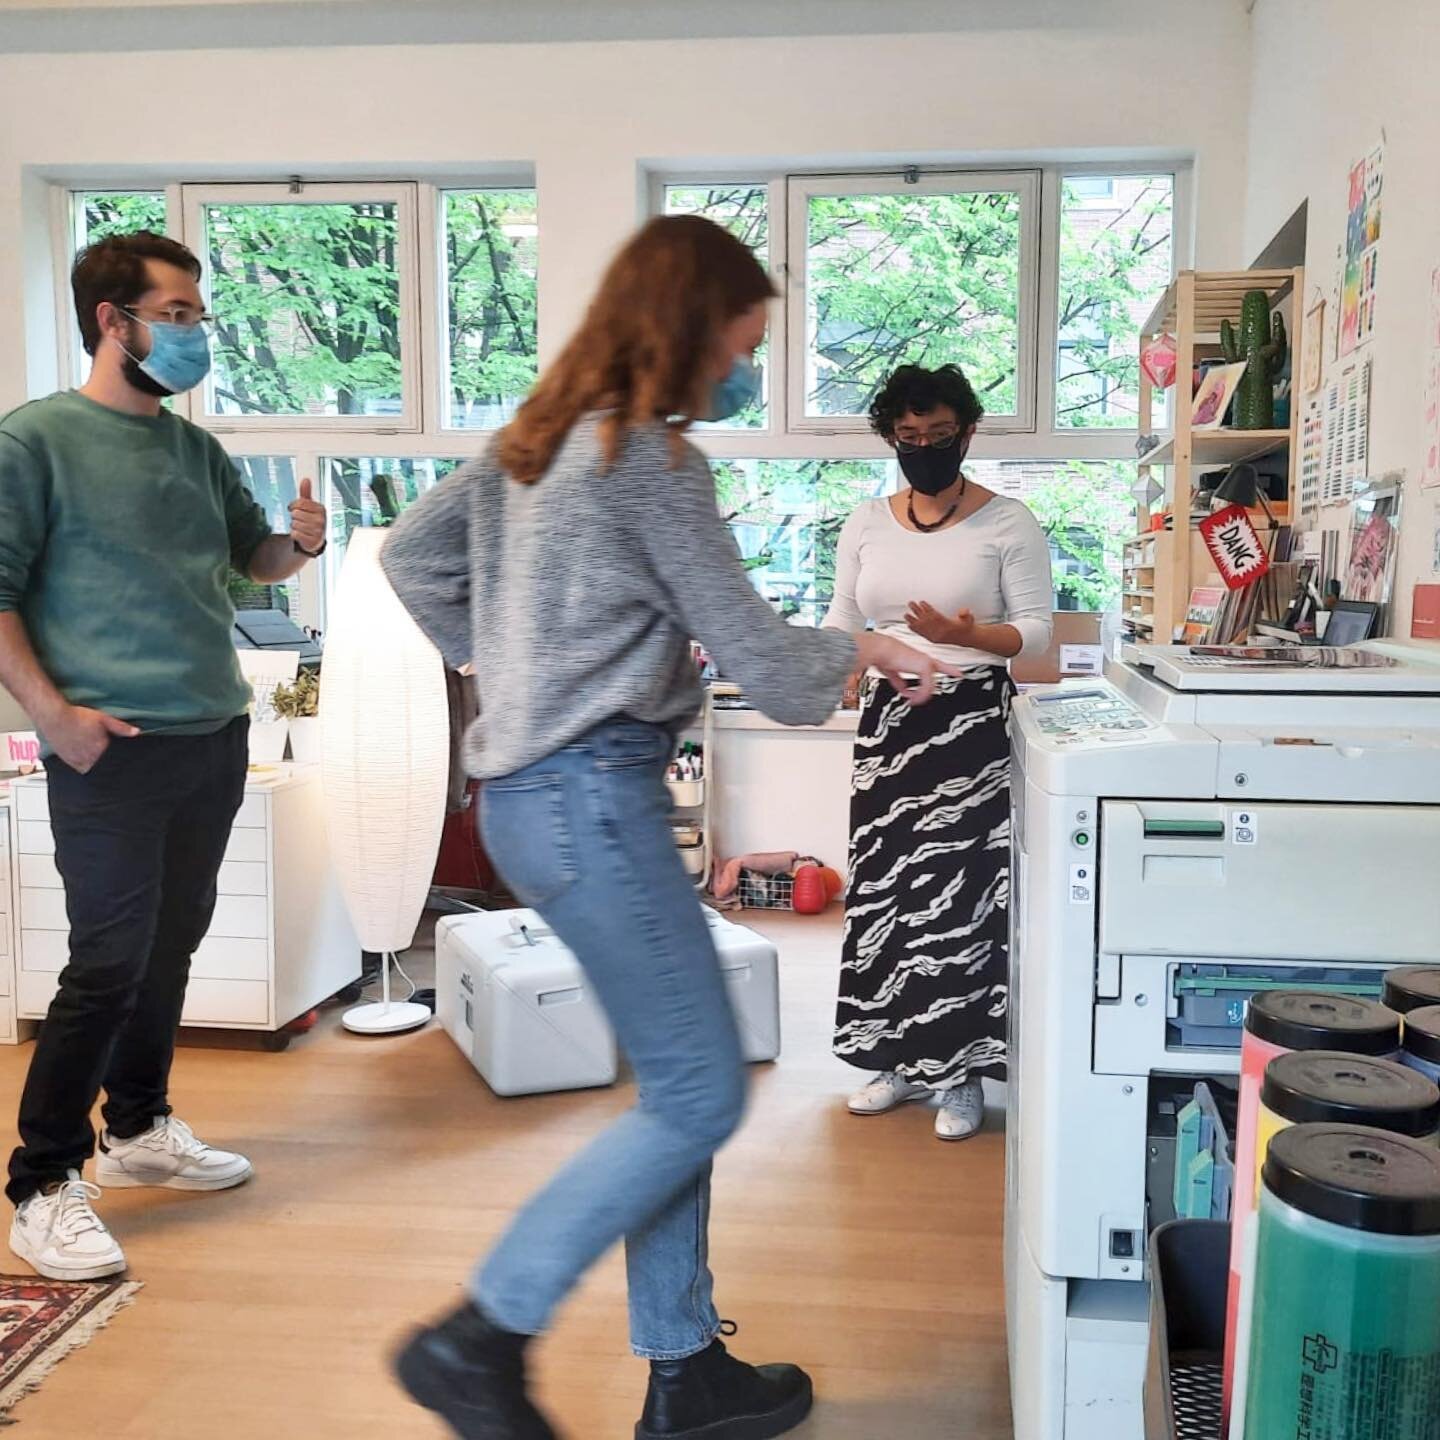 Last weekend was a tiny tiny glimpse of how slowly the studio can get back to being a welcoming &lsquo;open&rsquo; space ✨💜

It was so nice to meet people &ldquo;for real&rdquo; as well as to host mini workshops and enjoy casual chatting ☺️

I know 